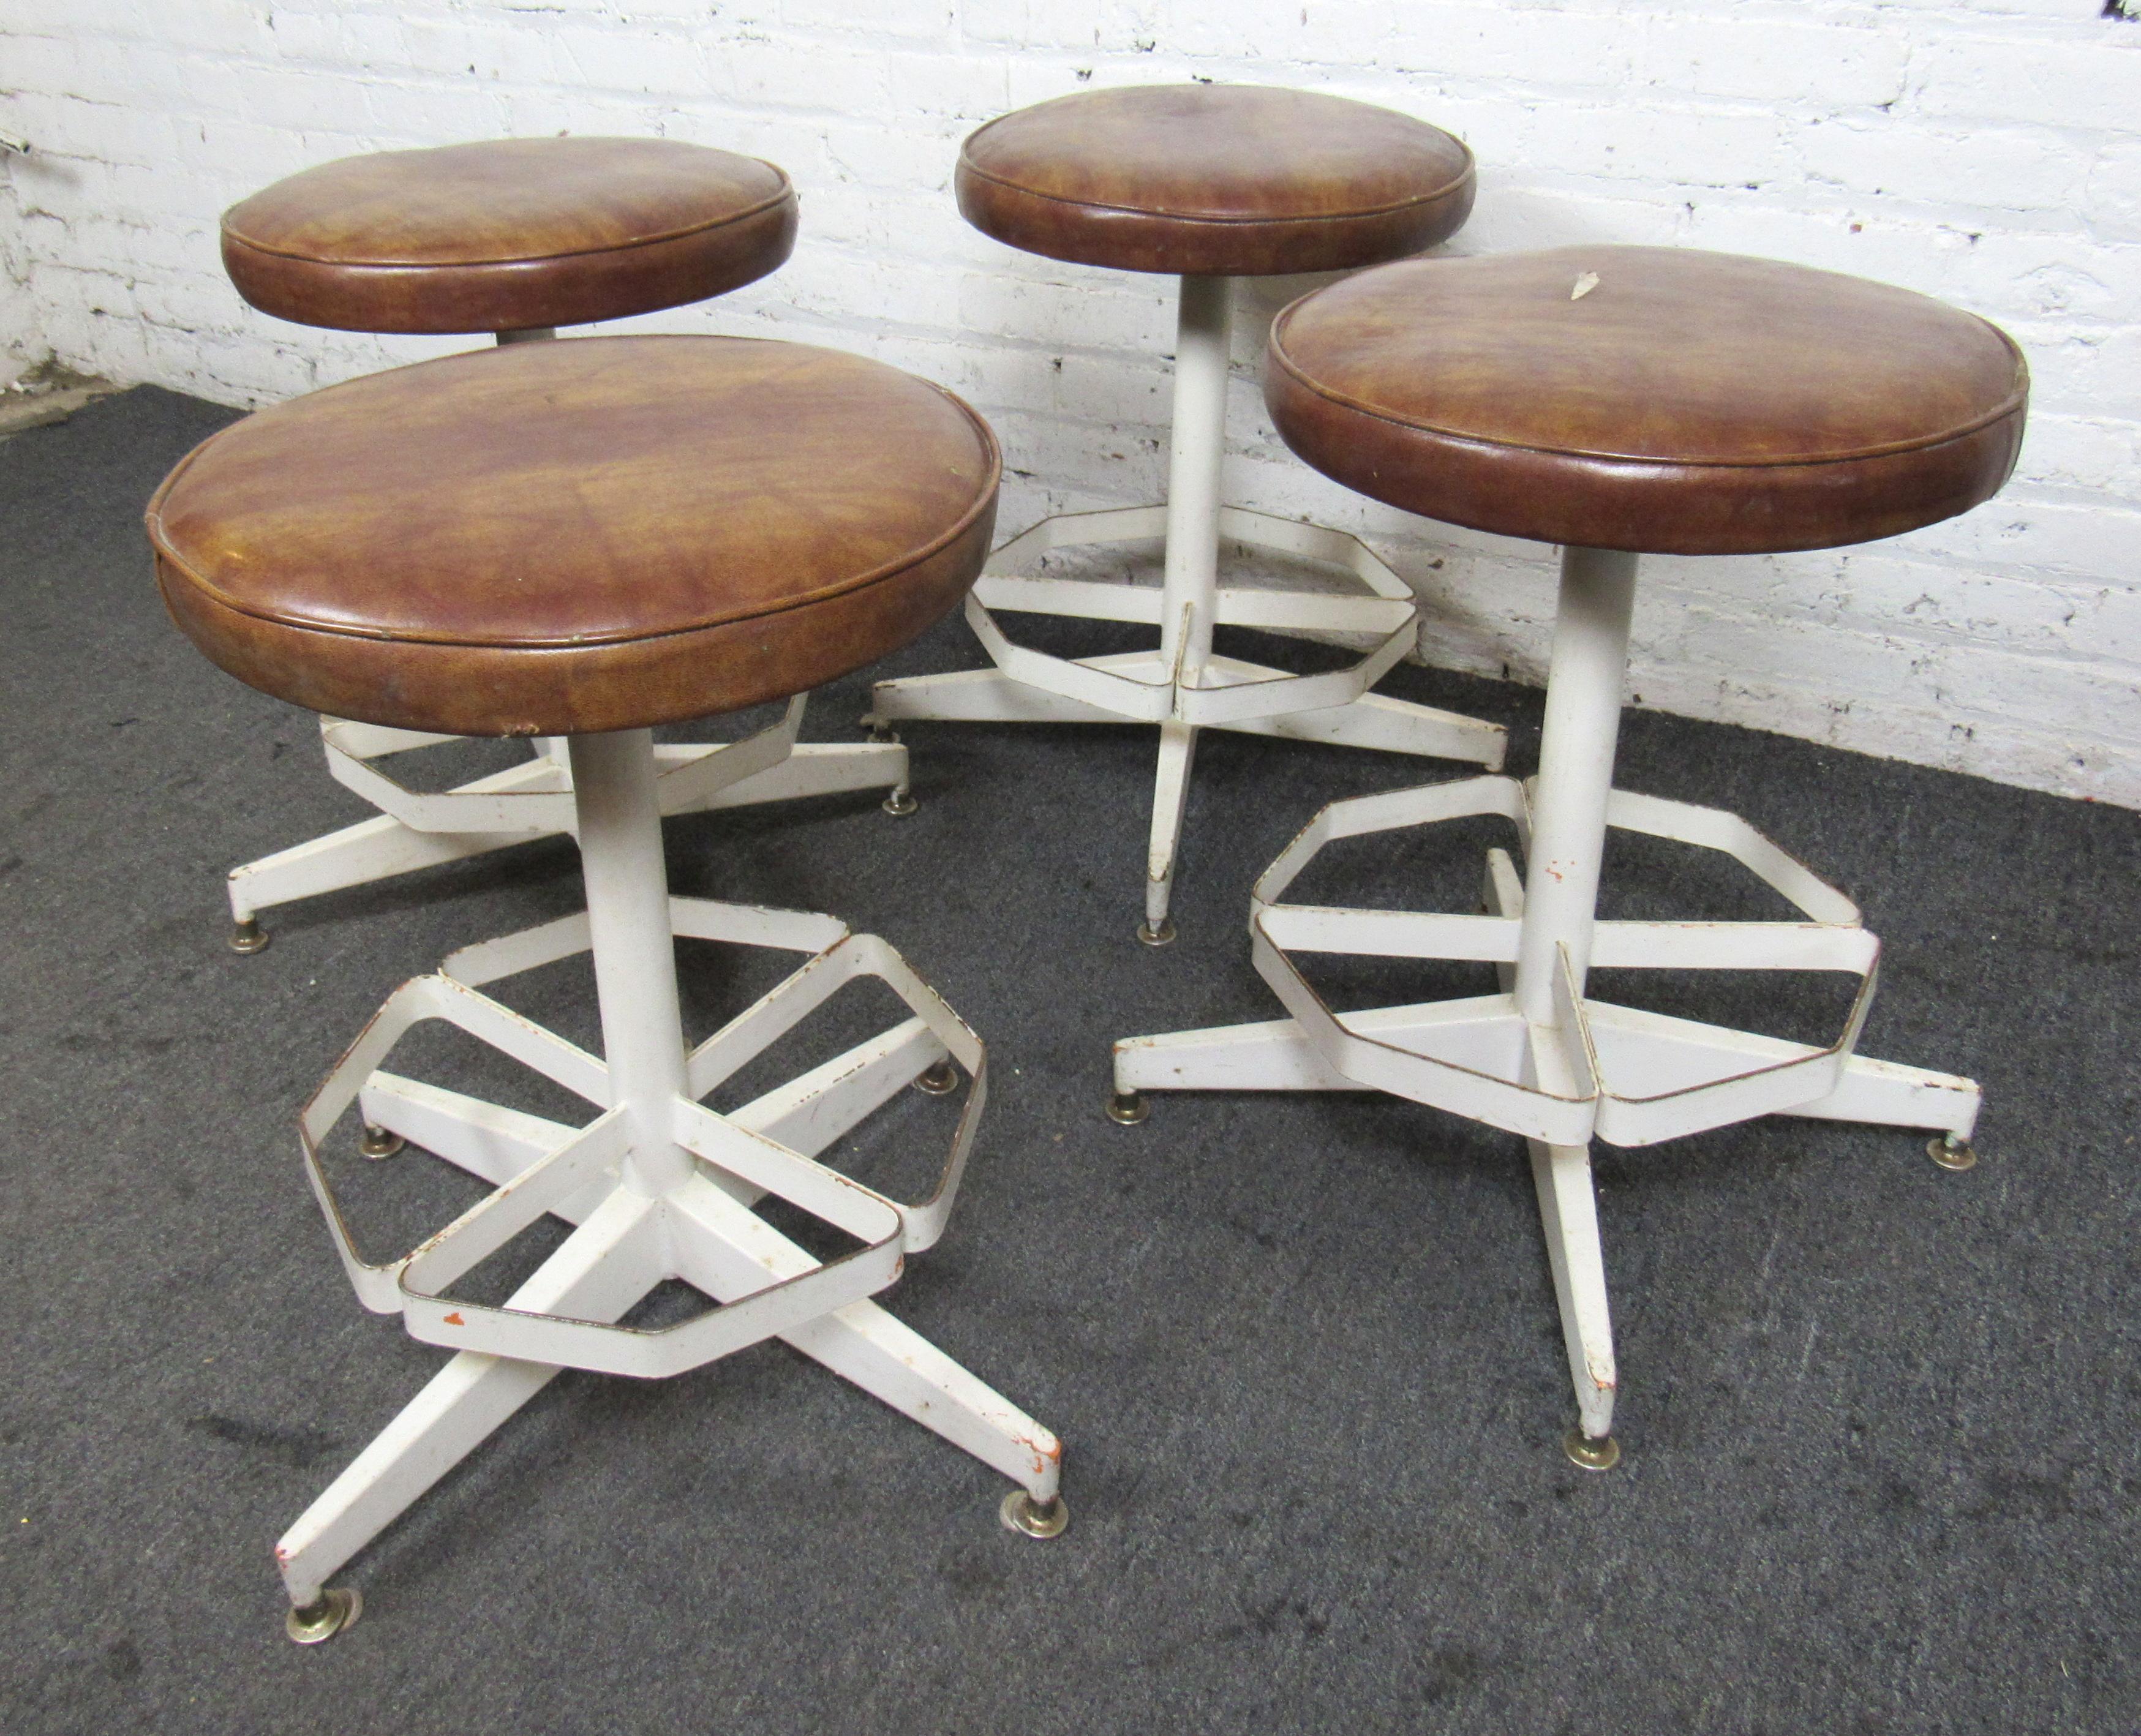 Vintage iron factory stools with vinyl cushions. Painted metal frames with footrests. 
(Please confirm location NY or NJ)